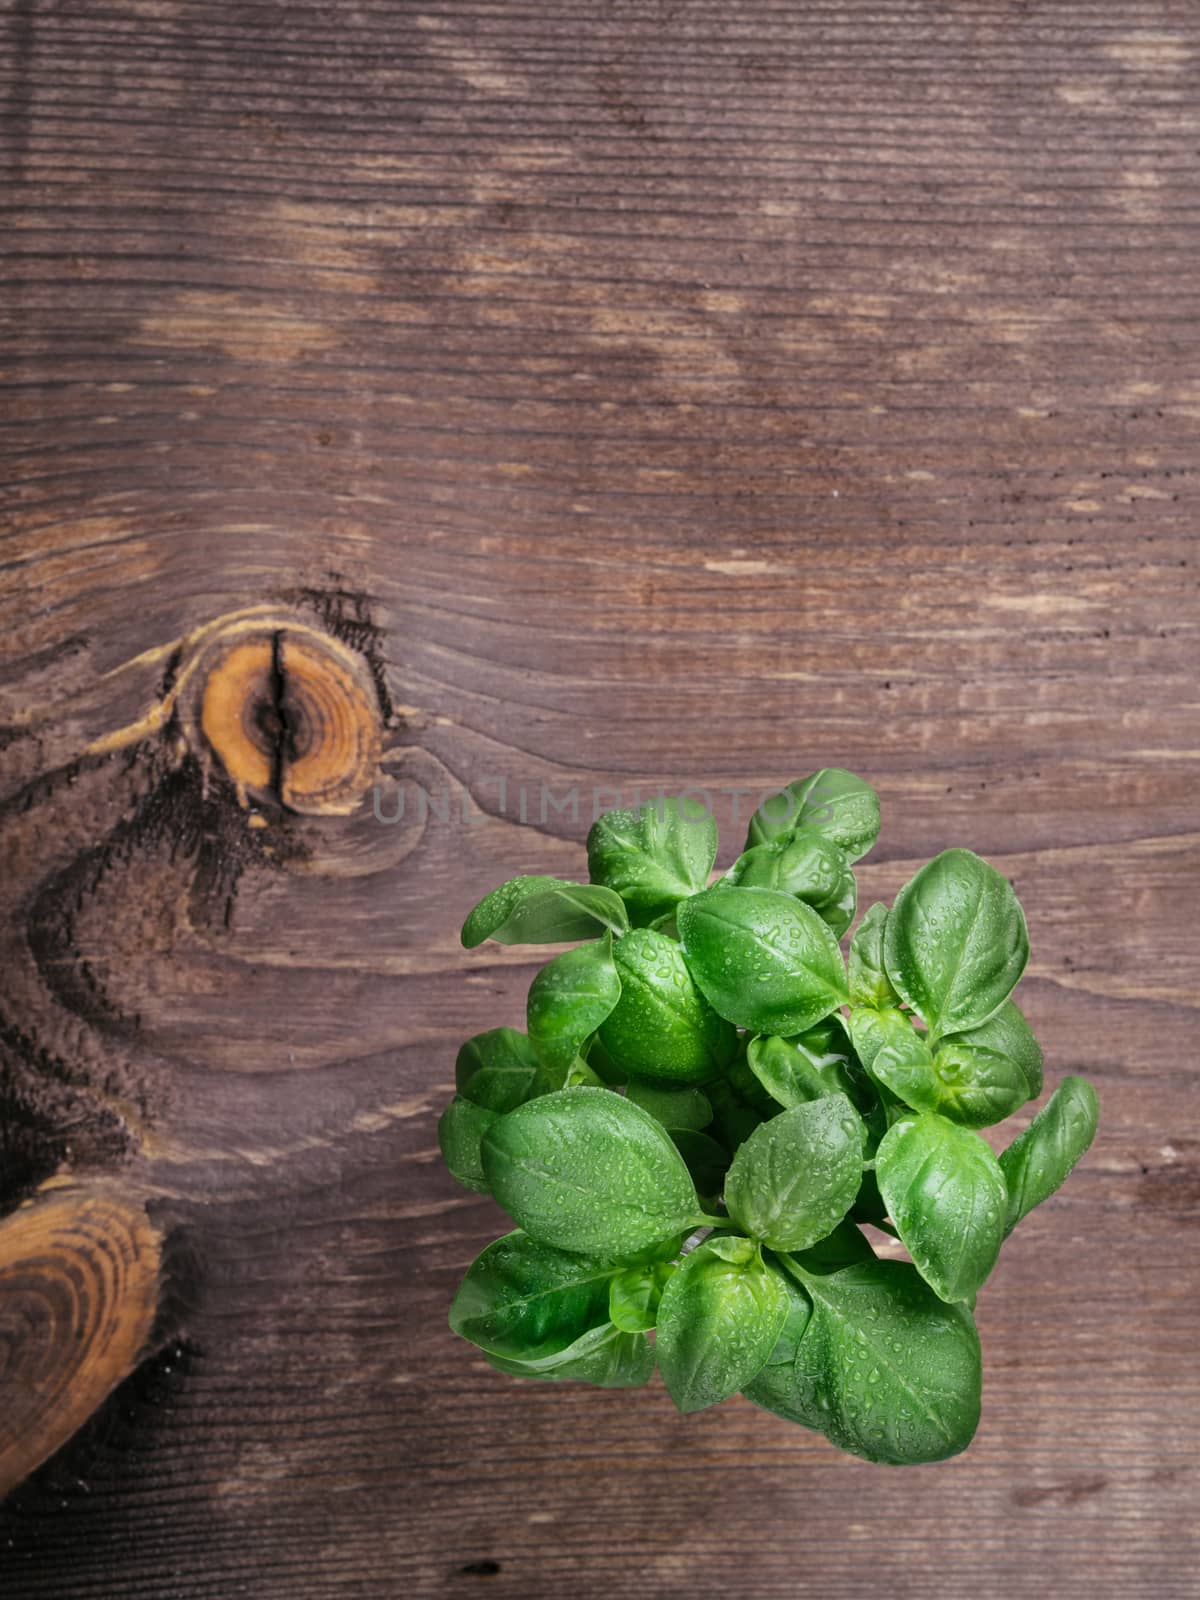 Bunch of fresh basil on brown wooden table. Fresh green basil on dark wood background with copy space. Top view or flat lay. Vertical.